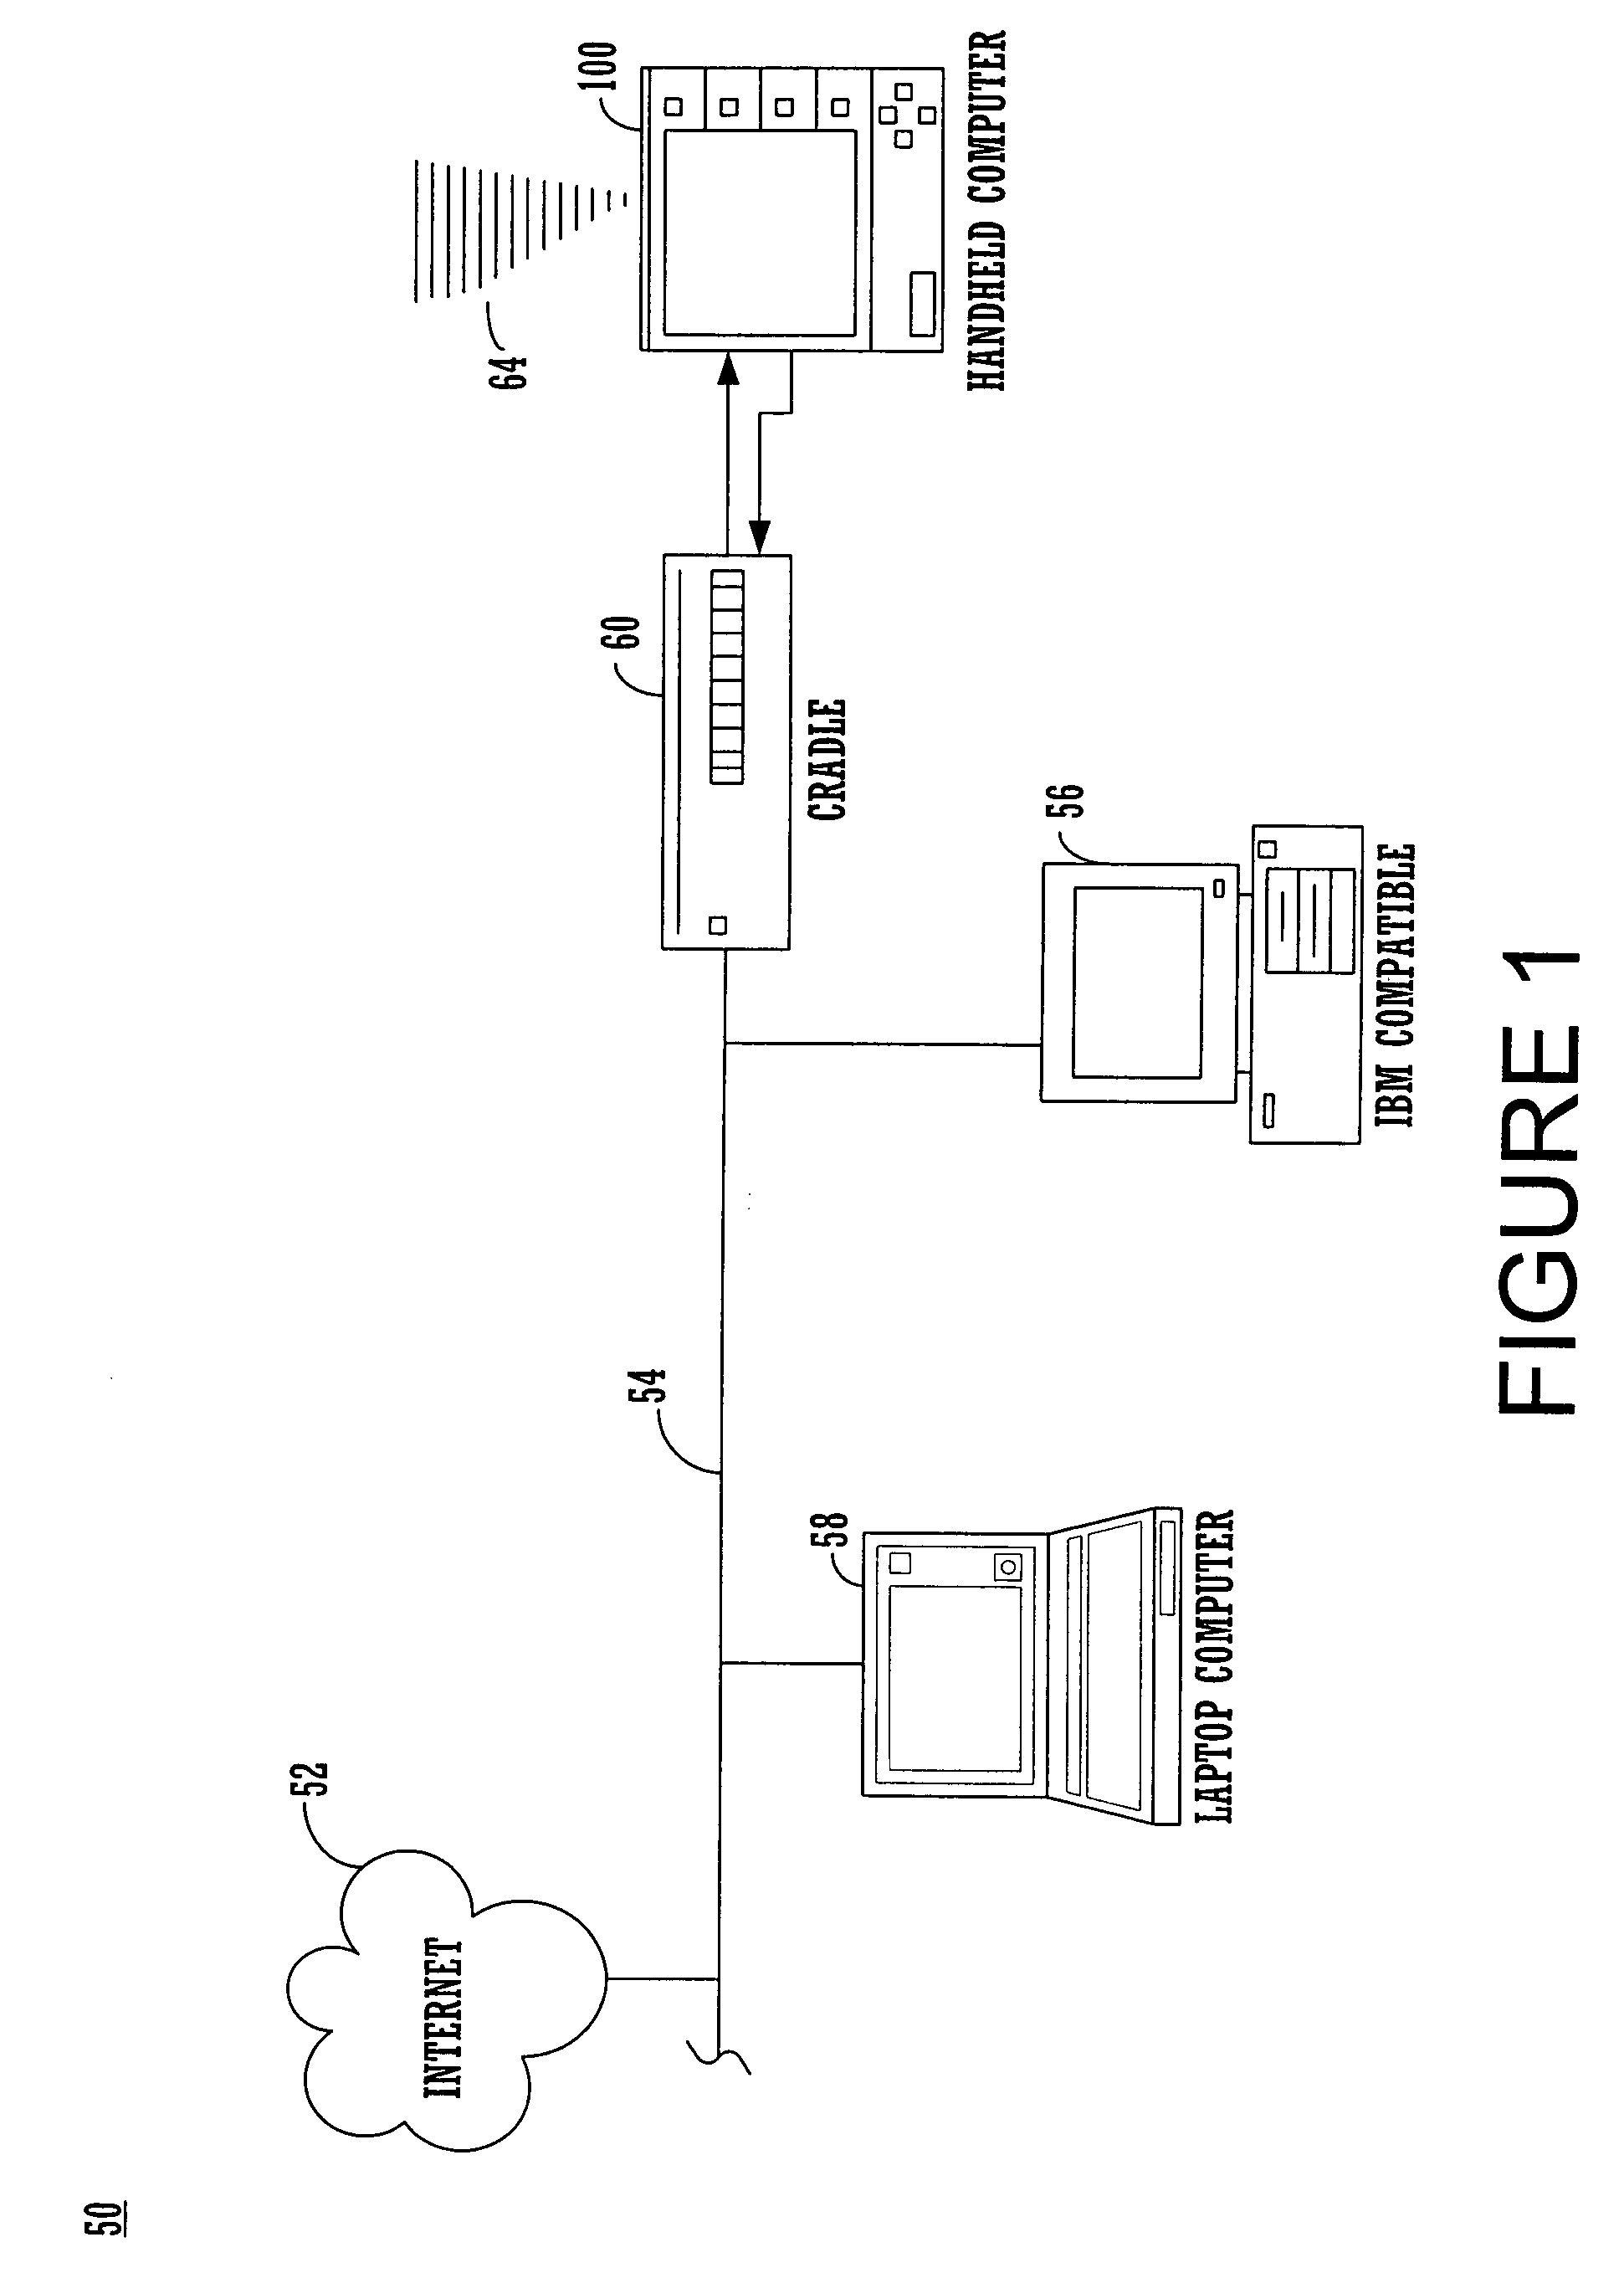 Method and apparatus for using pressure information for improved computer controlled handwriting recognition, data entry and user authentication